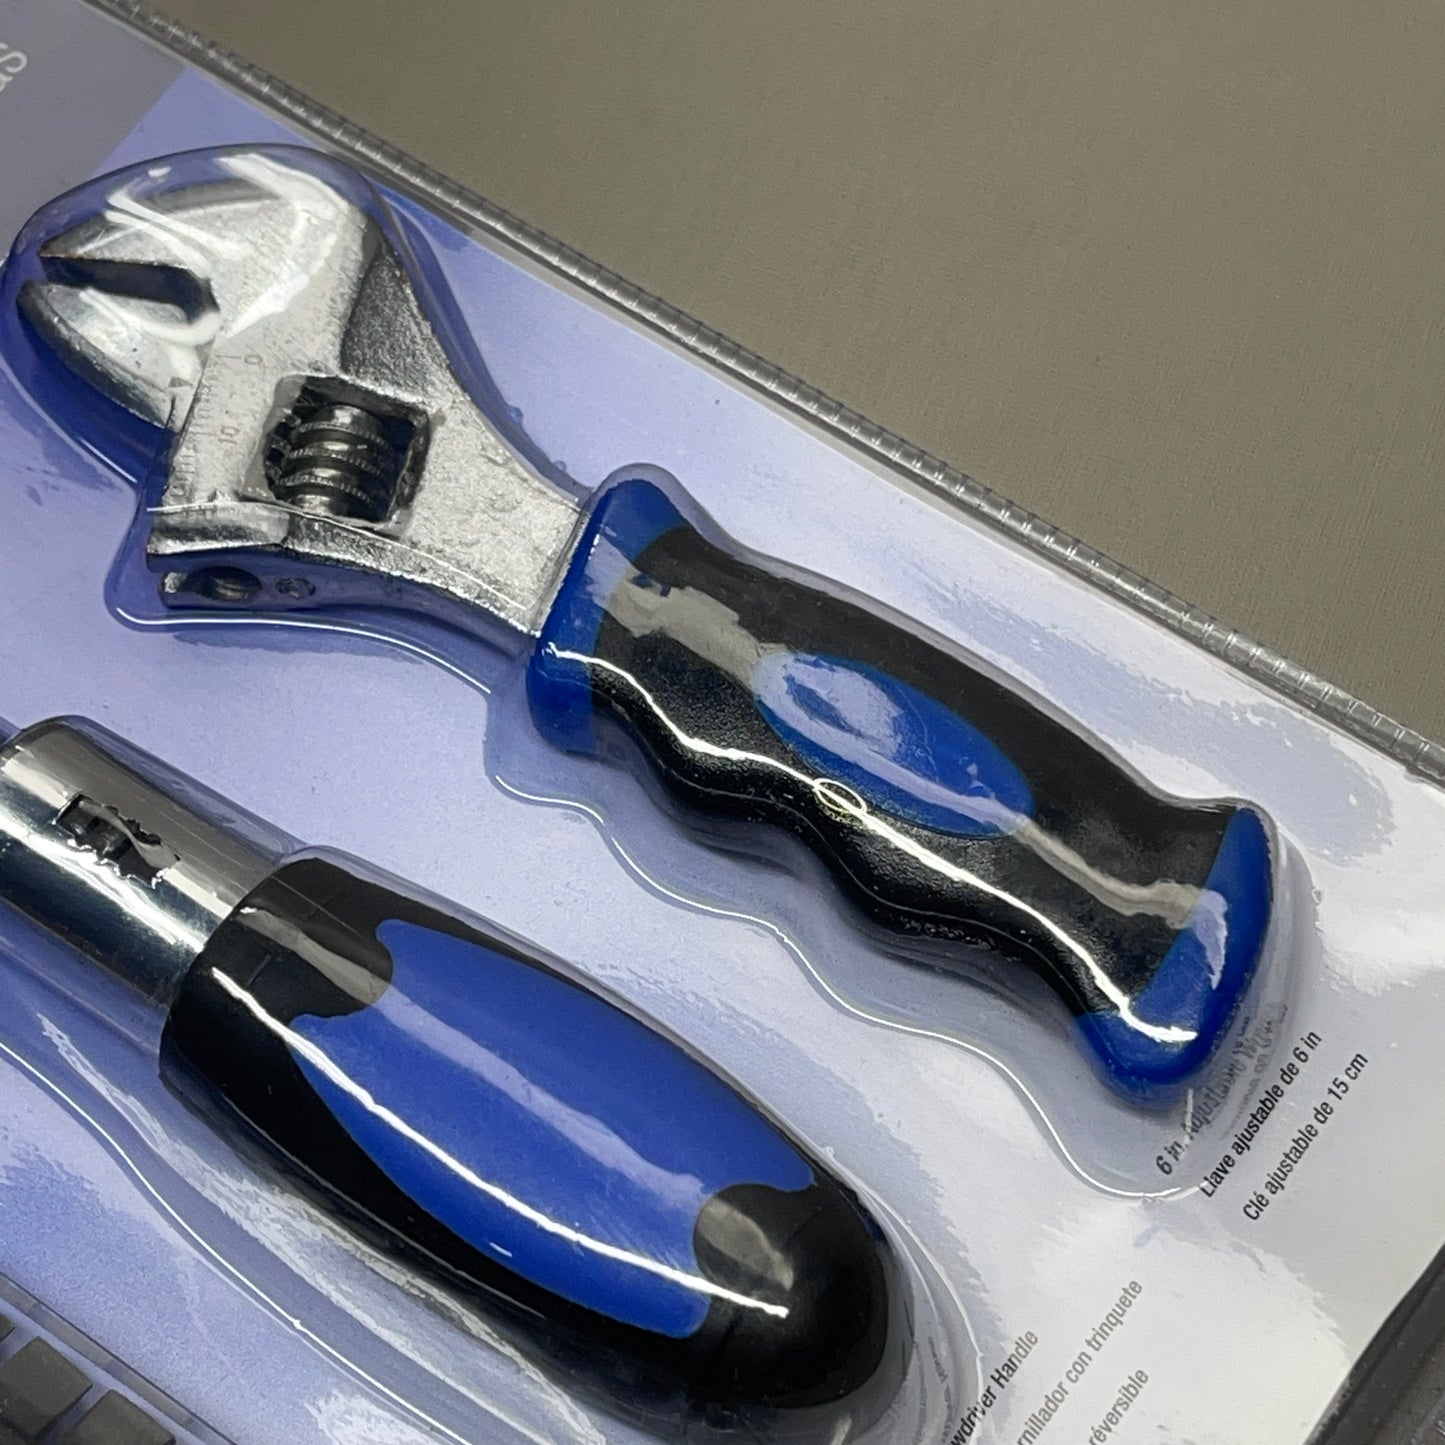 HELPING HAND 12 PC Stubby Tool Set W/ Adjustable Wrench And Screwdriver FQ20309 (New)